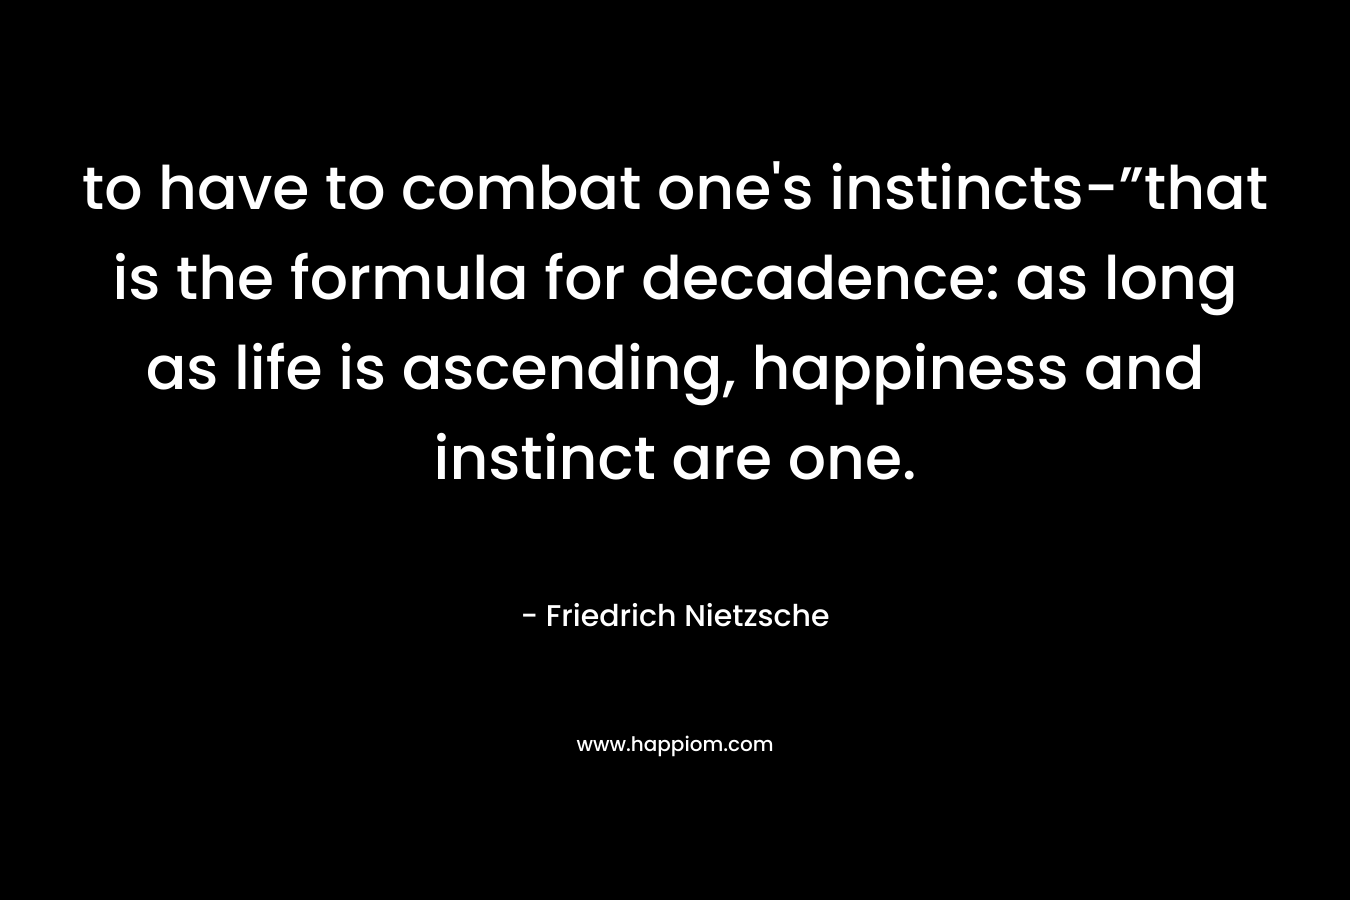 to have to combat one’s instincts-”that is the formula for decadence: as long as life is ascending, happiness and instinct are one. – Friedrich Nietzsche